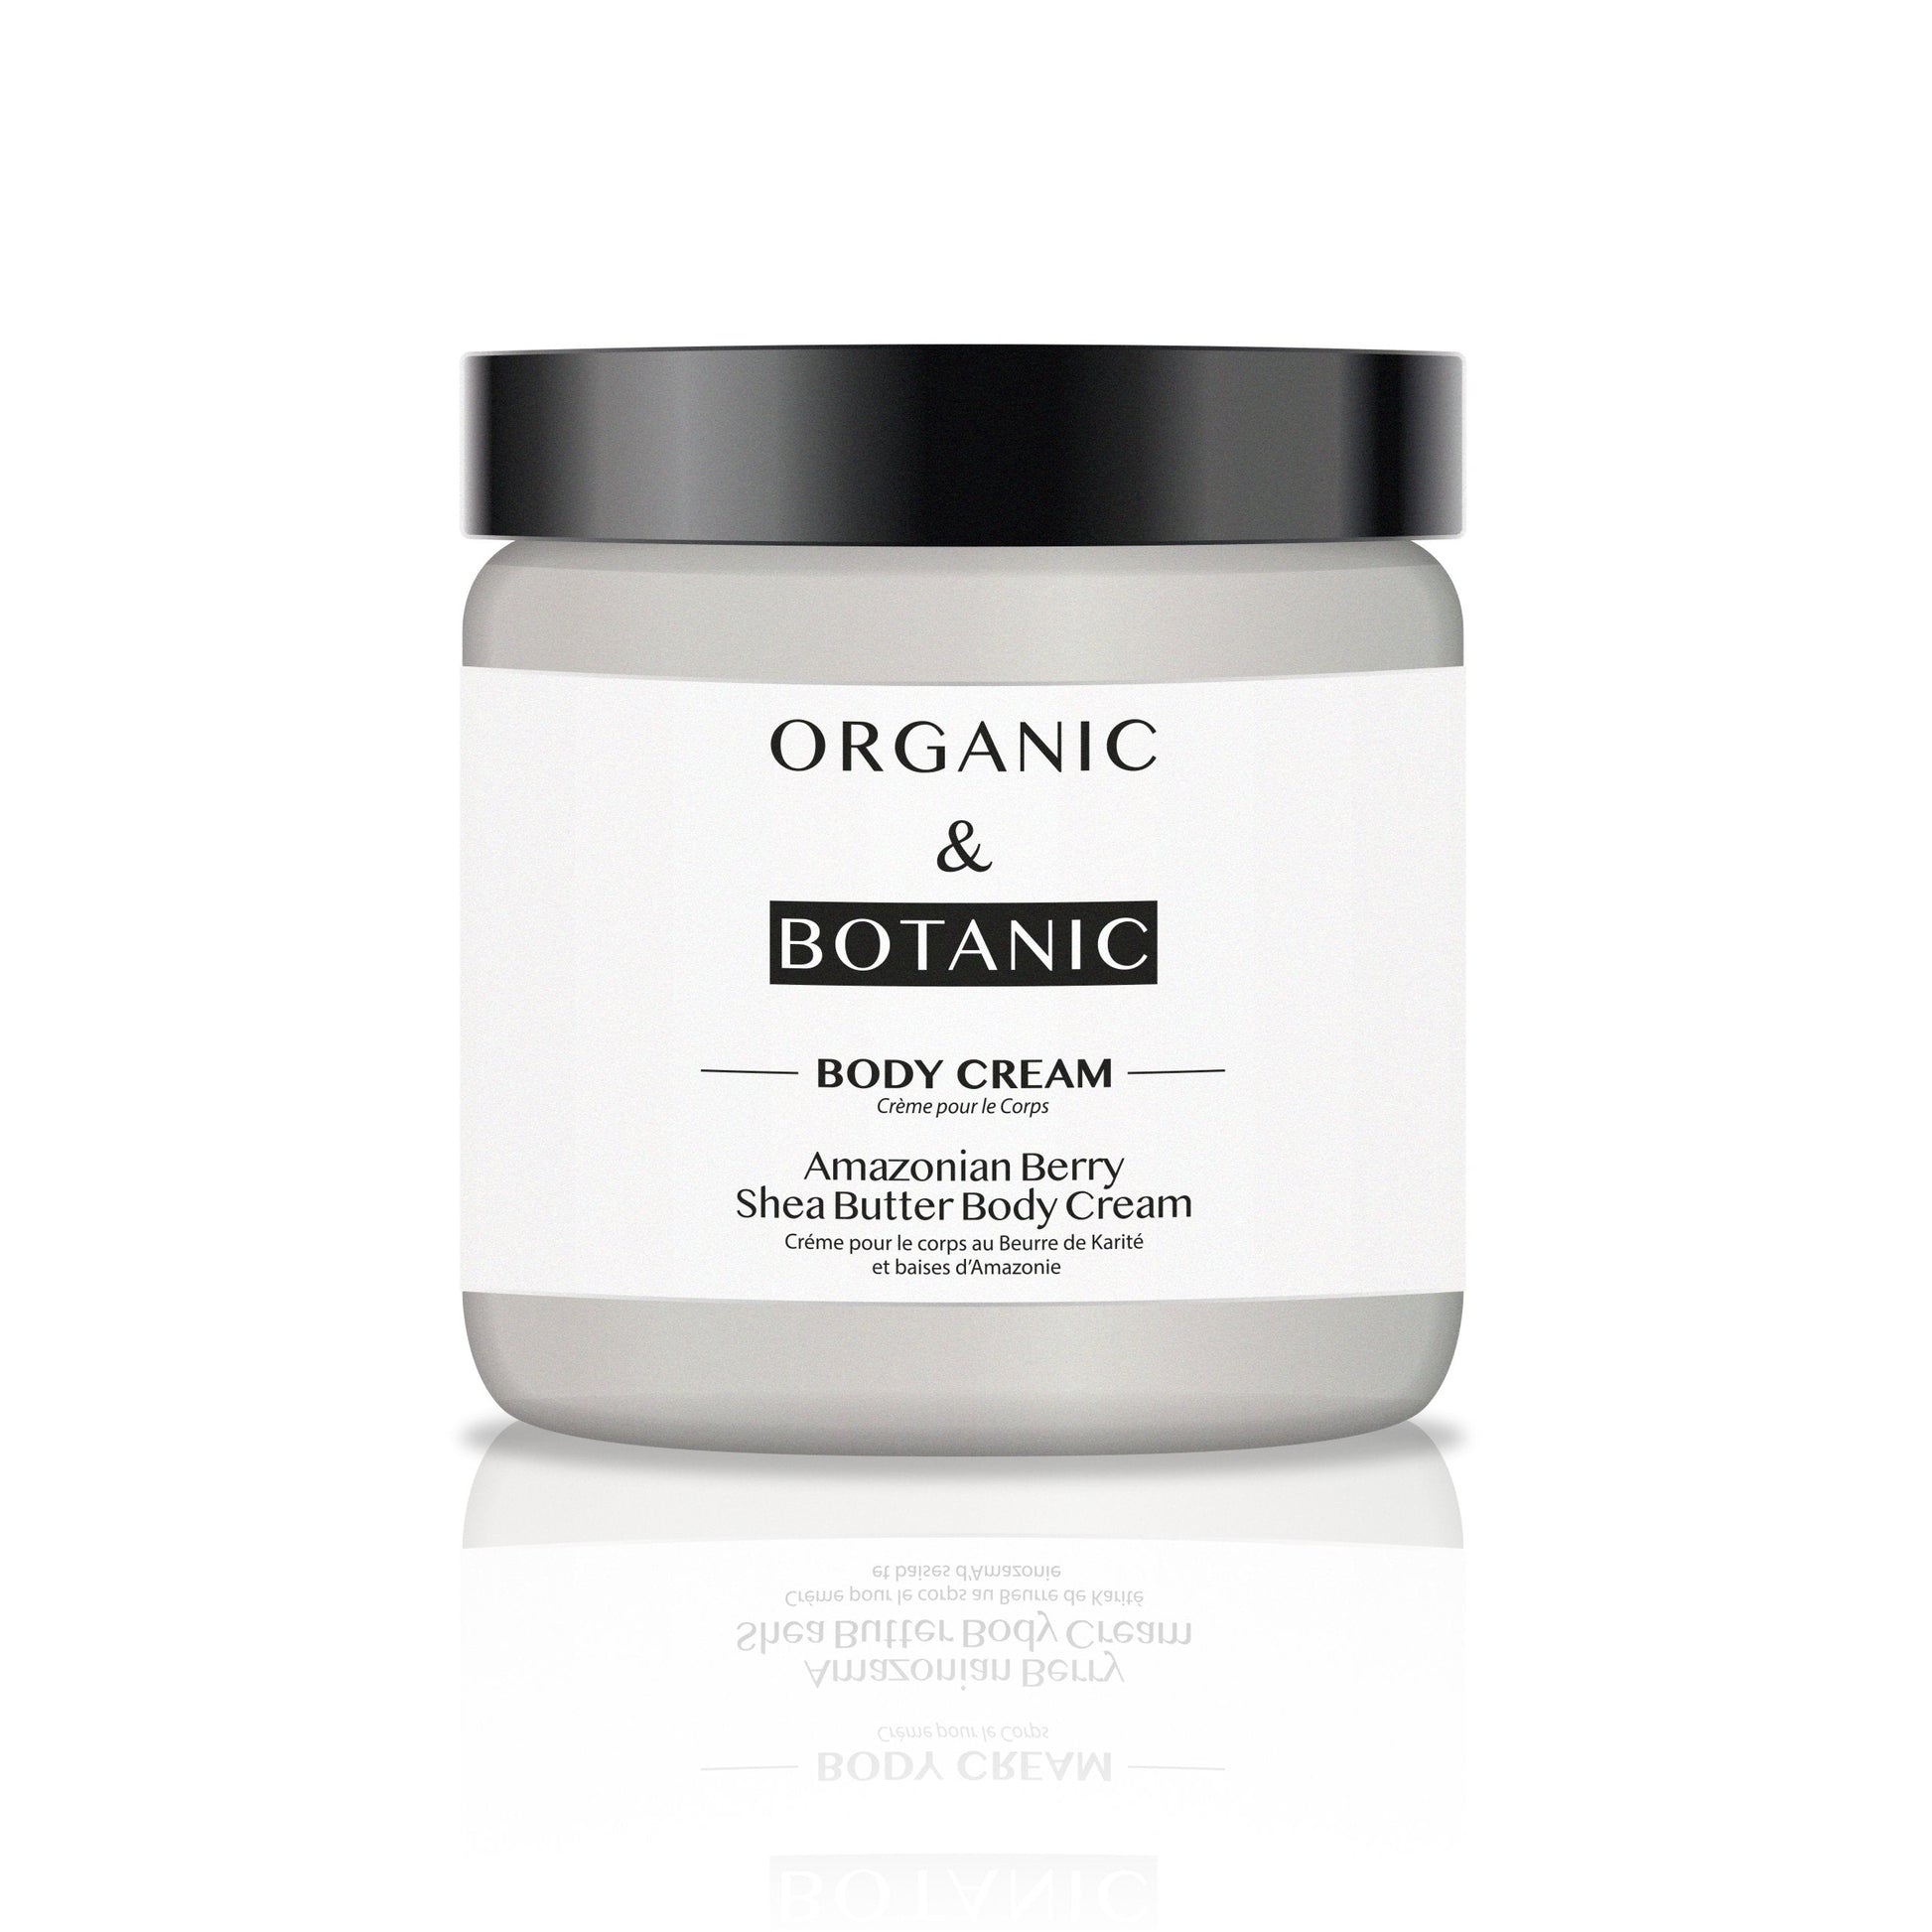 Limited Edition Amazonian Berry Shea Butter Body Cream - Dr. Botanicals Skincare